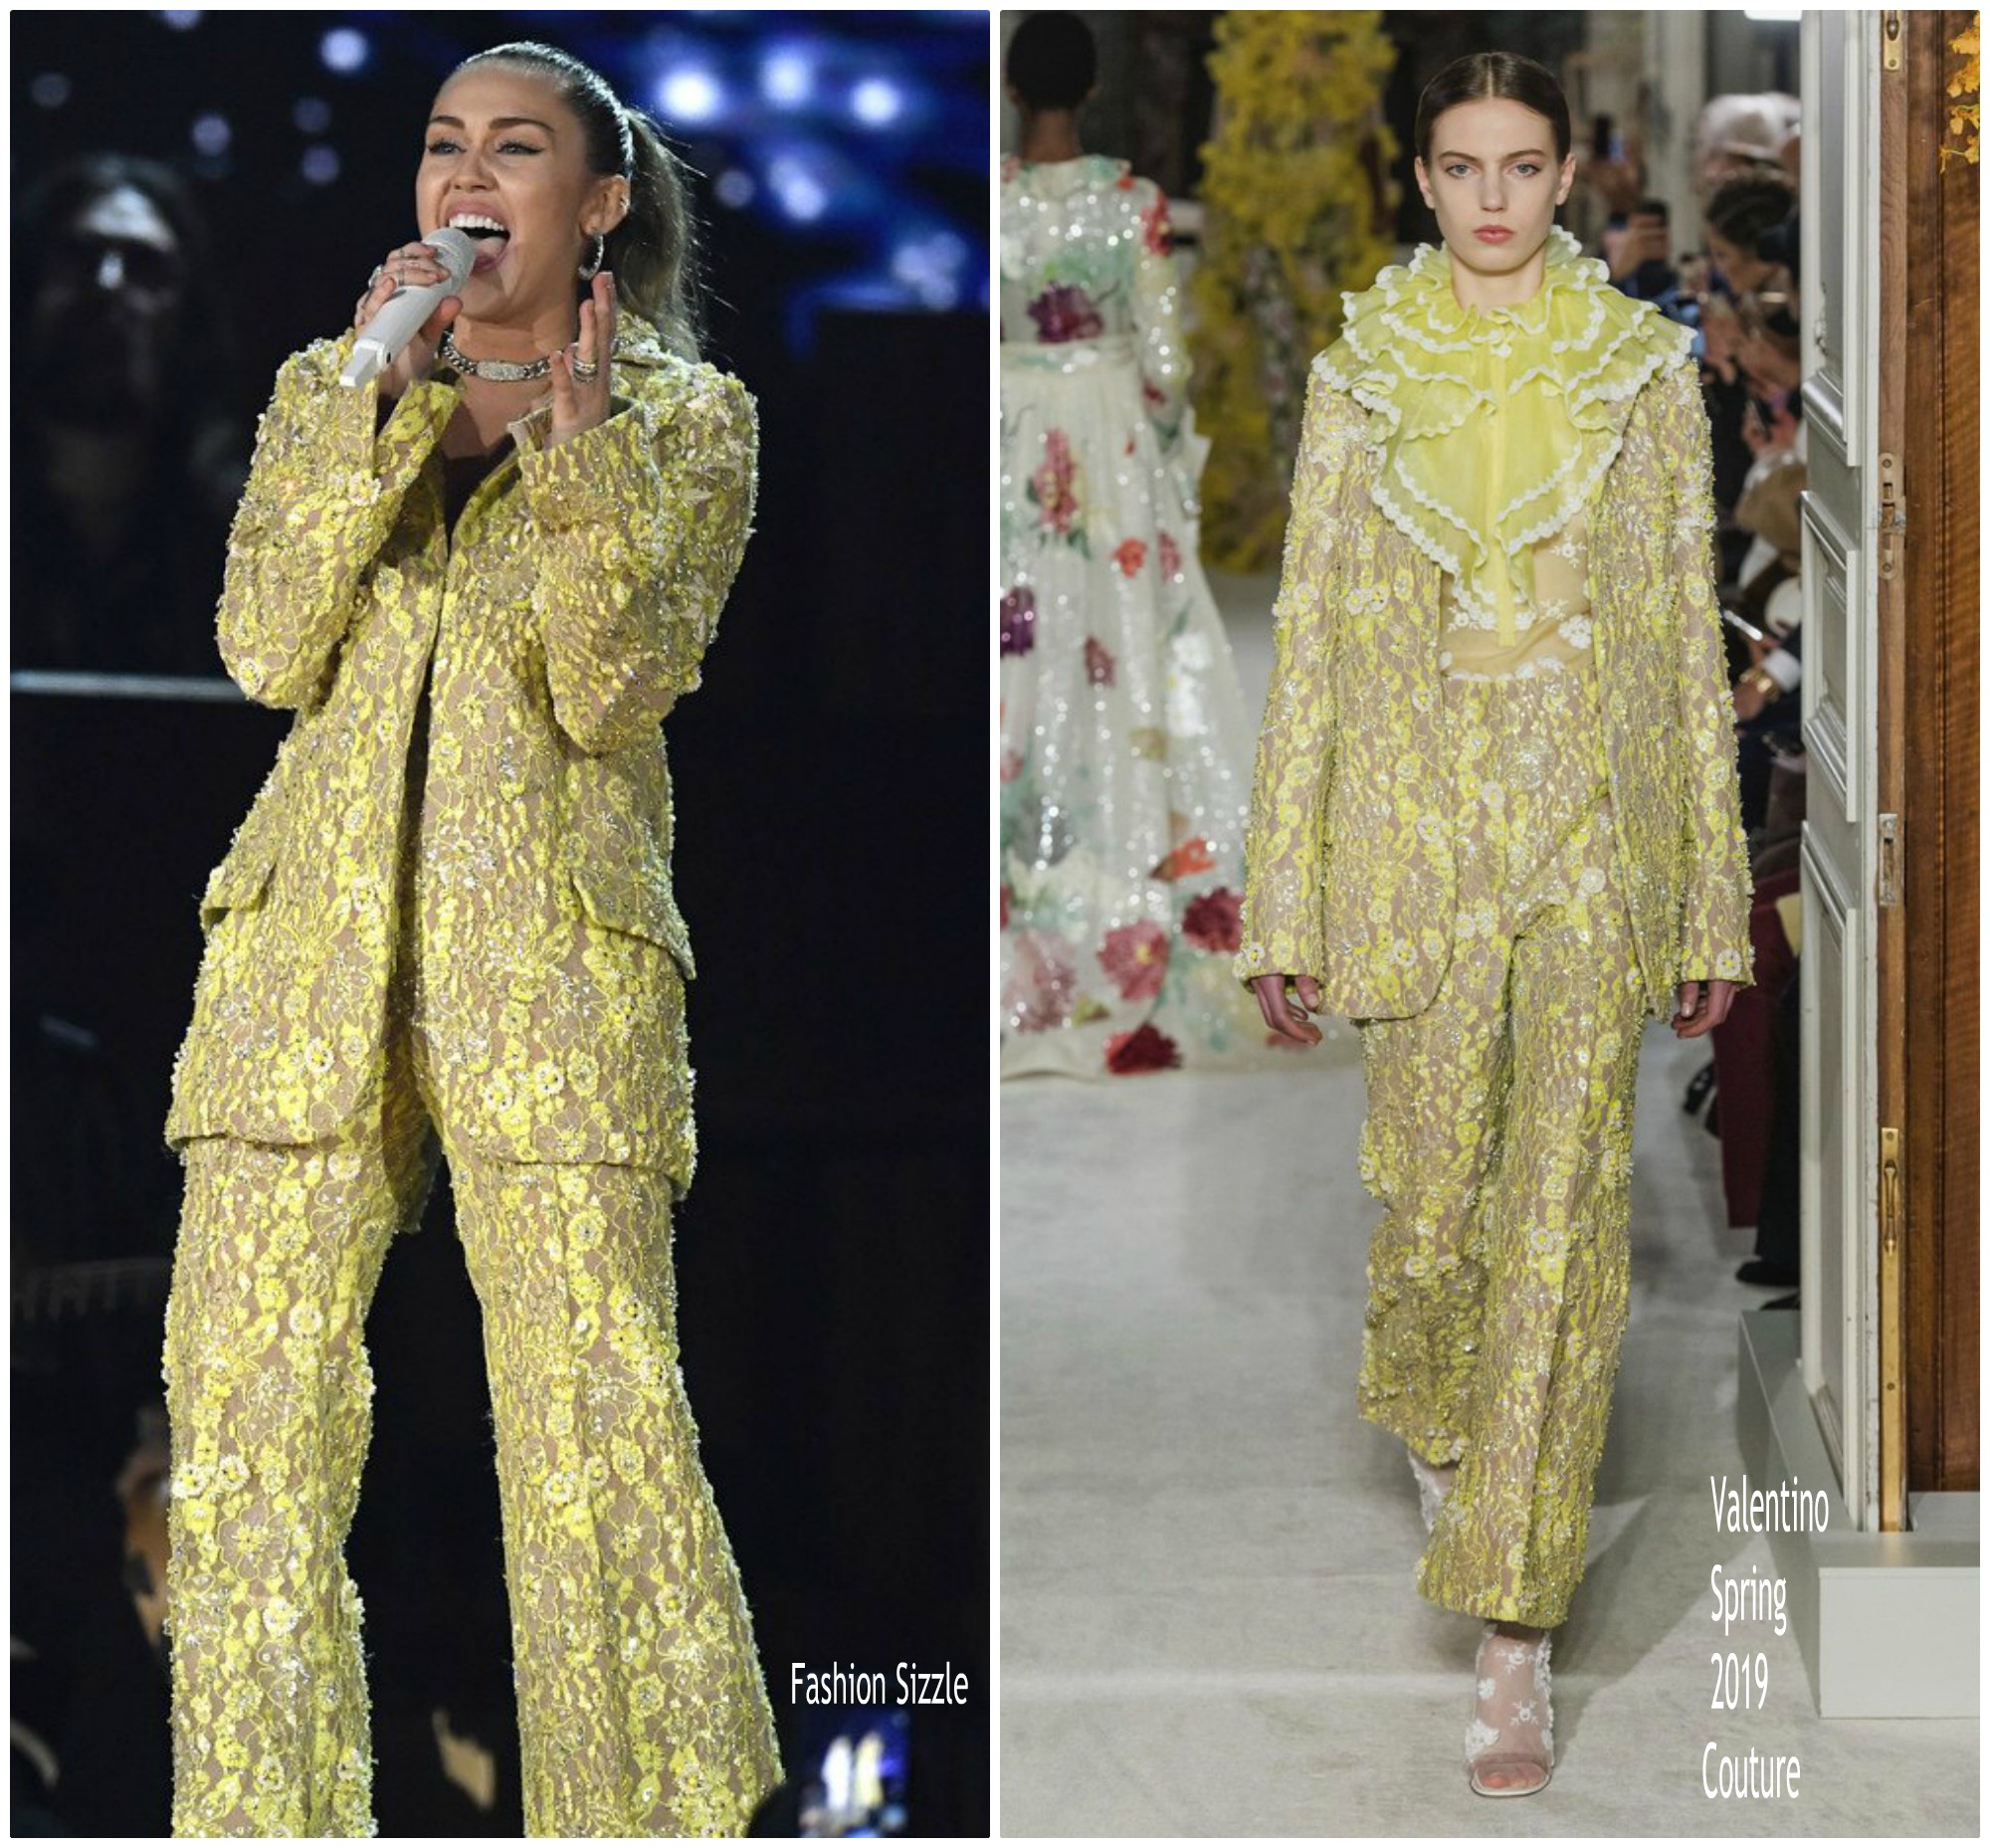 miley-cyrus-in-valentino-haute-couture-performance-with-dolly-parton-2019-grammy-awards